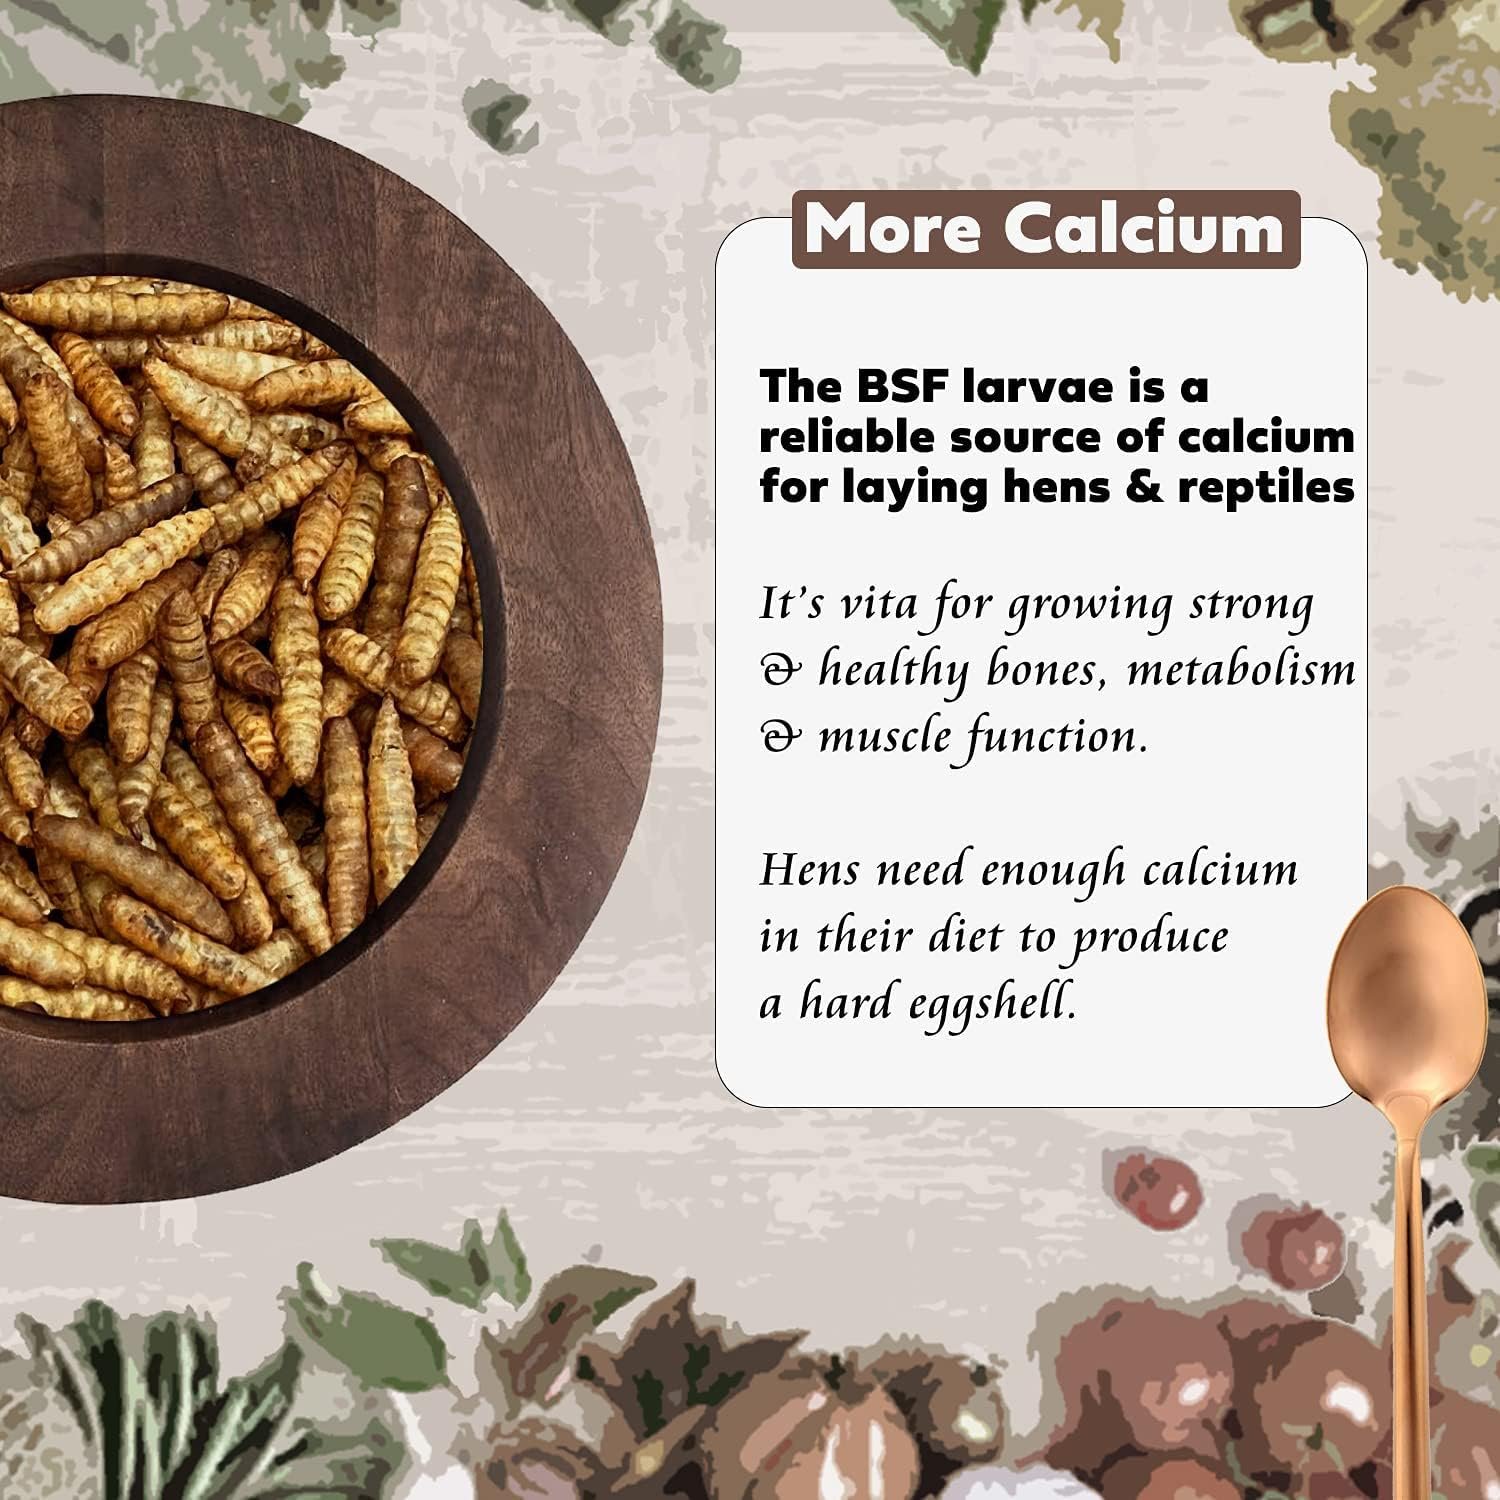 adaman Dried Black Soldier Fly Larvae 5 LBS-100% Natural Non-GMO BSF Larvae-More Calcium Than Dried Mealworms High-Protein Chickens Treats, Food for Wild Birds, Ducks, Layer Hens